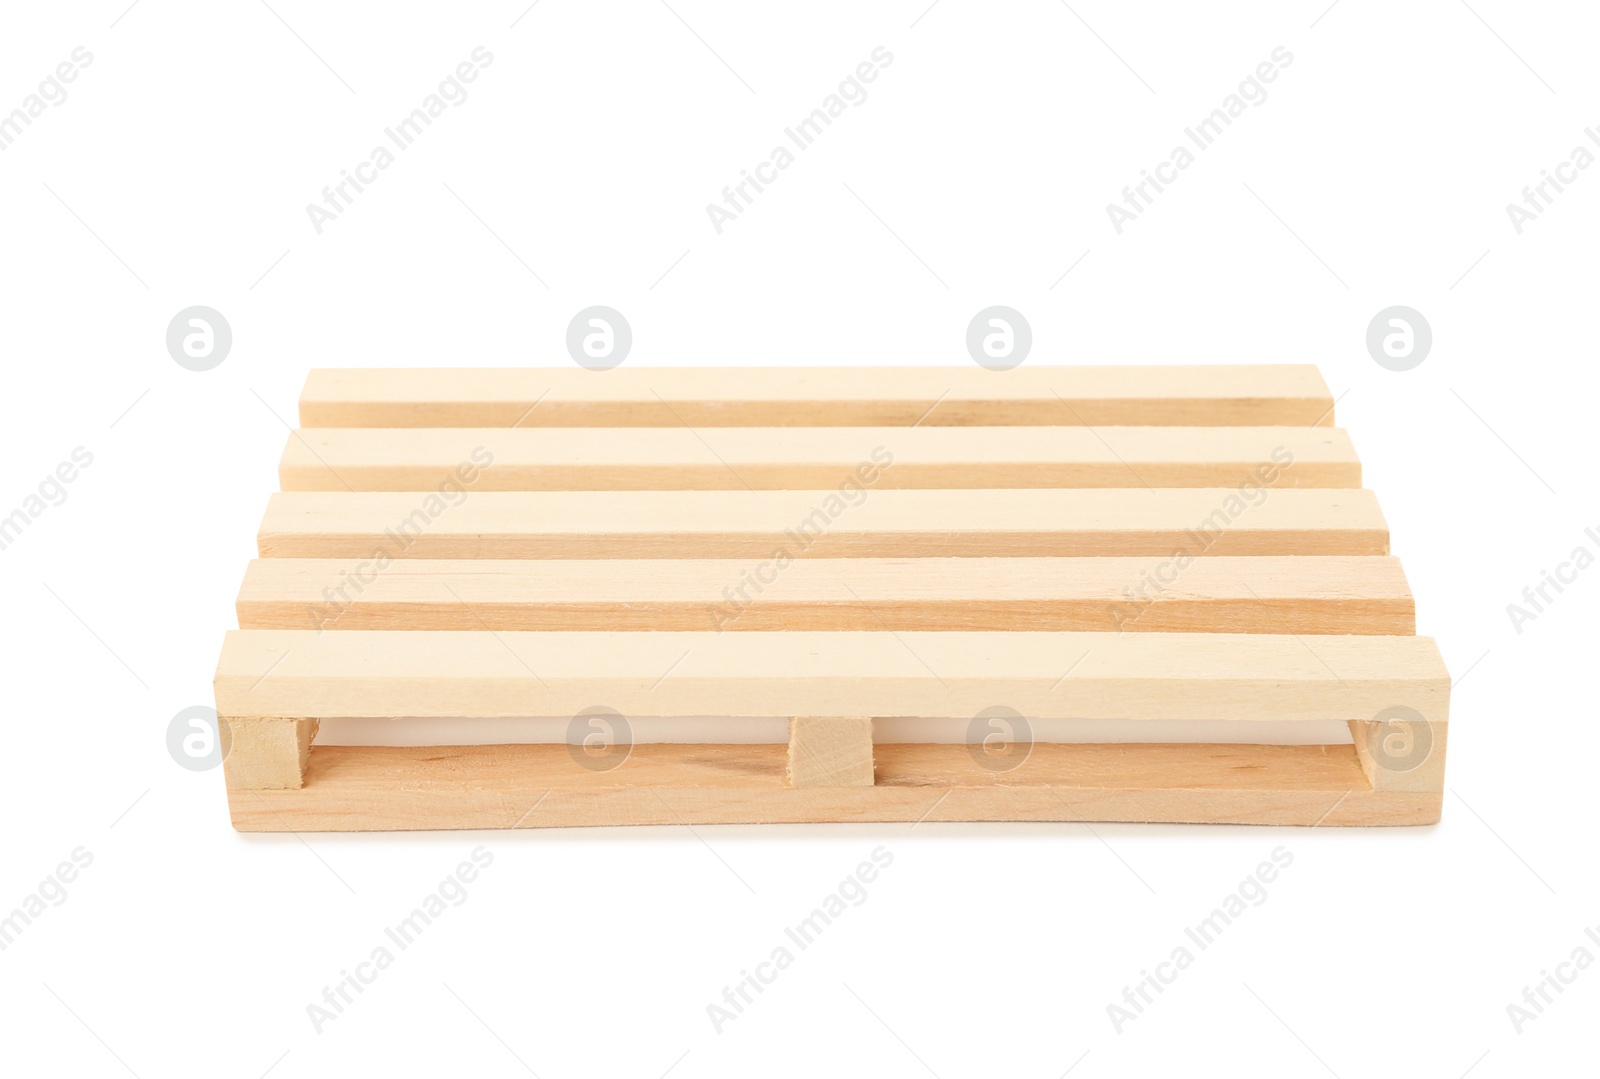 Photo of One small wooden pallet isolated on white